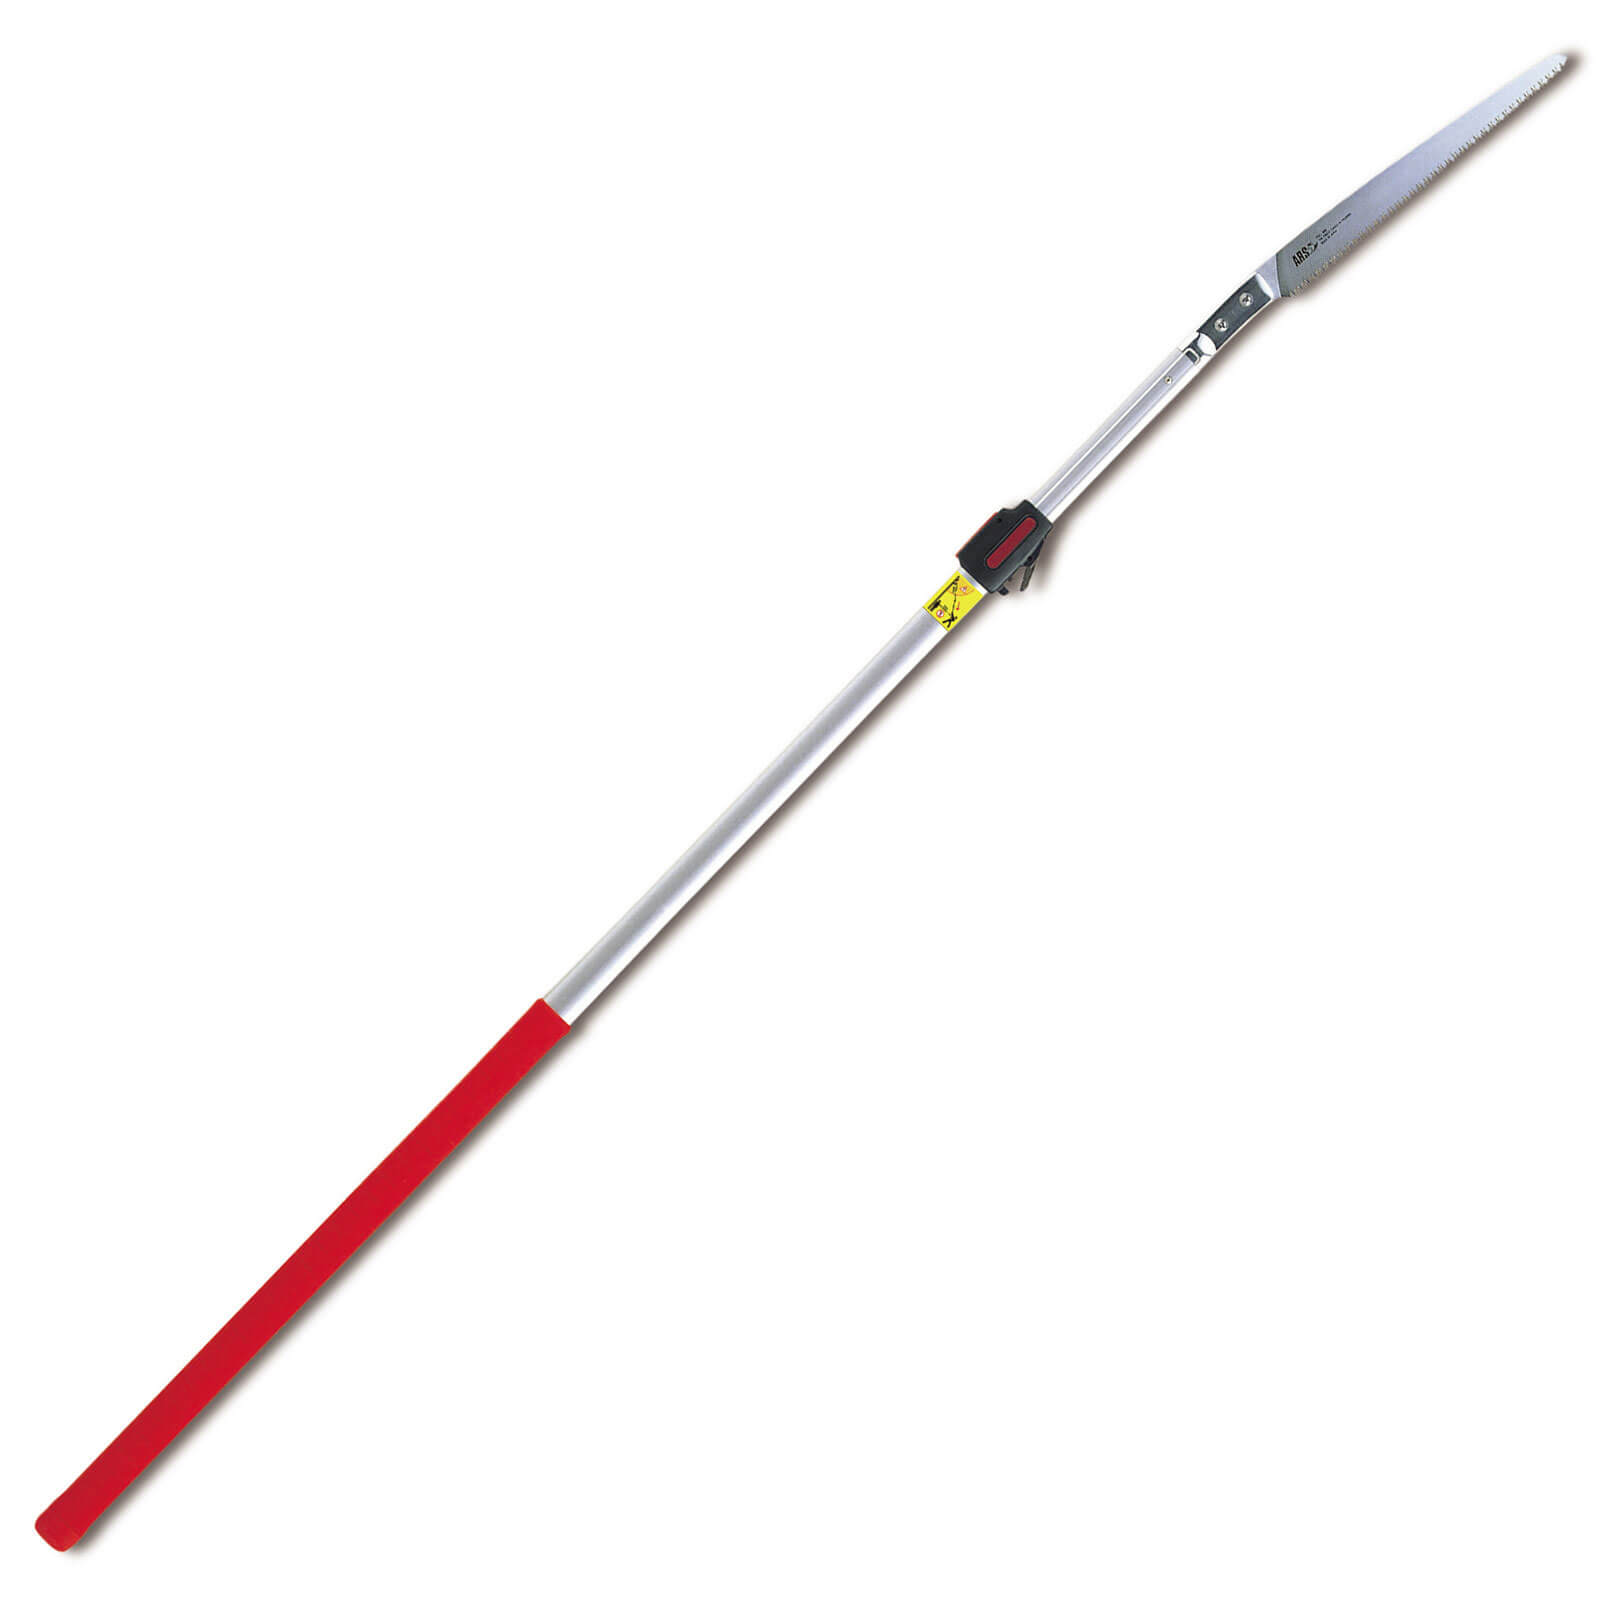 ARS EXW-2.7 Telescopic Pruning Pole Saw with 300mm Turbocut Straight Blade 1.8 - 2.7 Metres Long